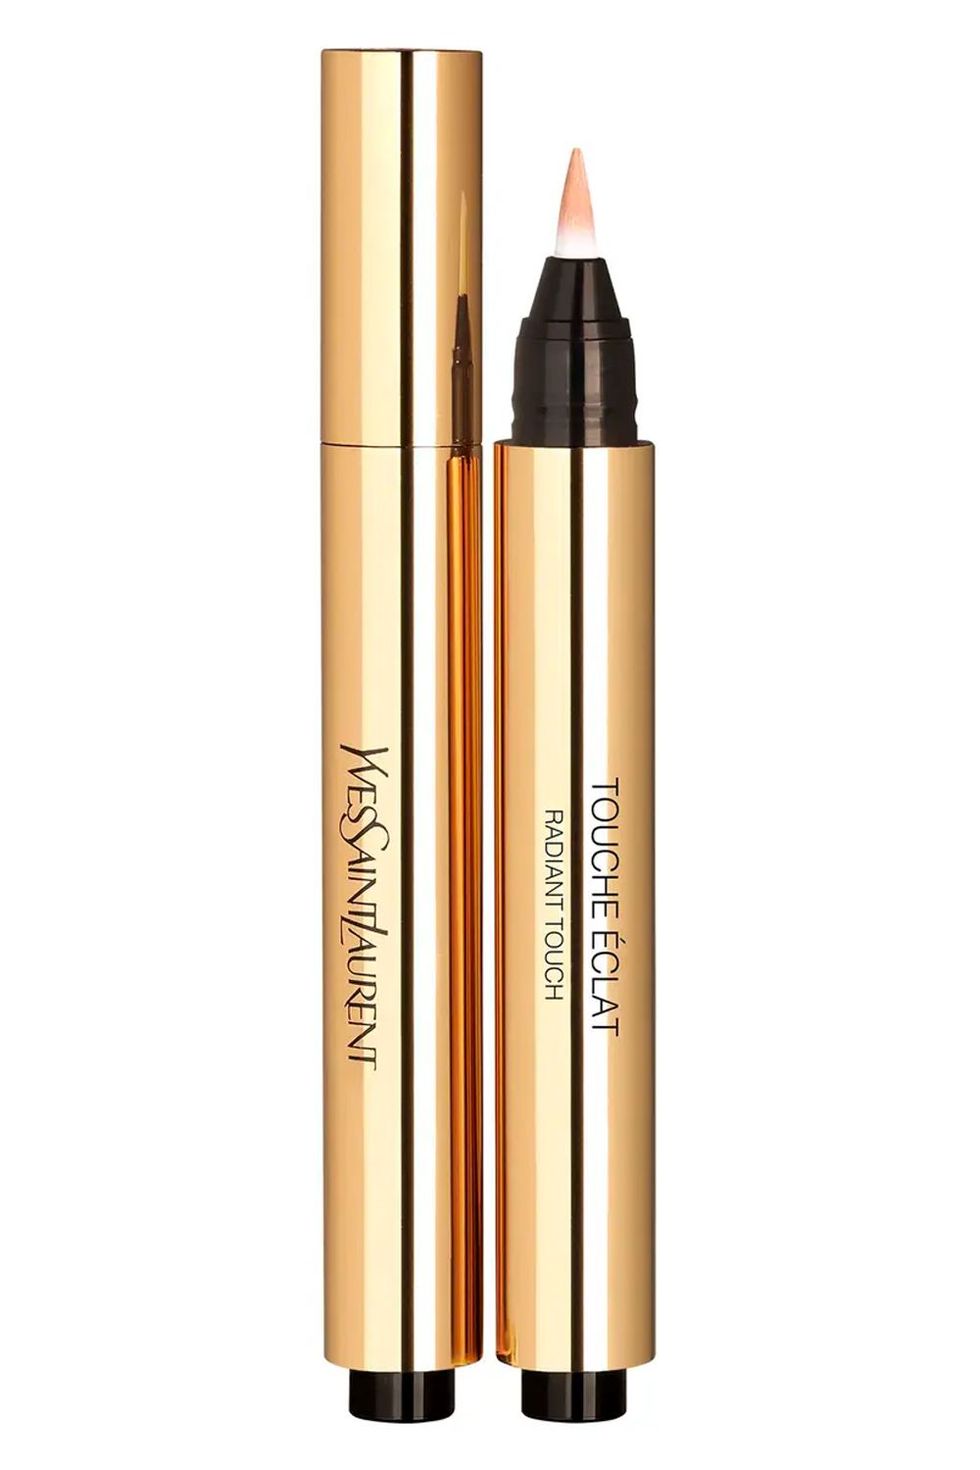 The 14 Best Concealers for Mature Skin of 2023